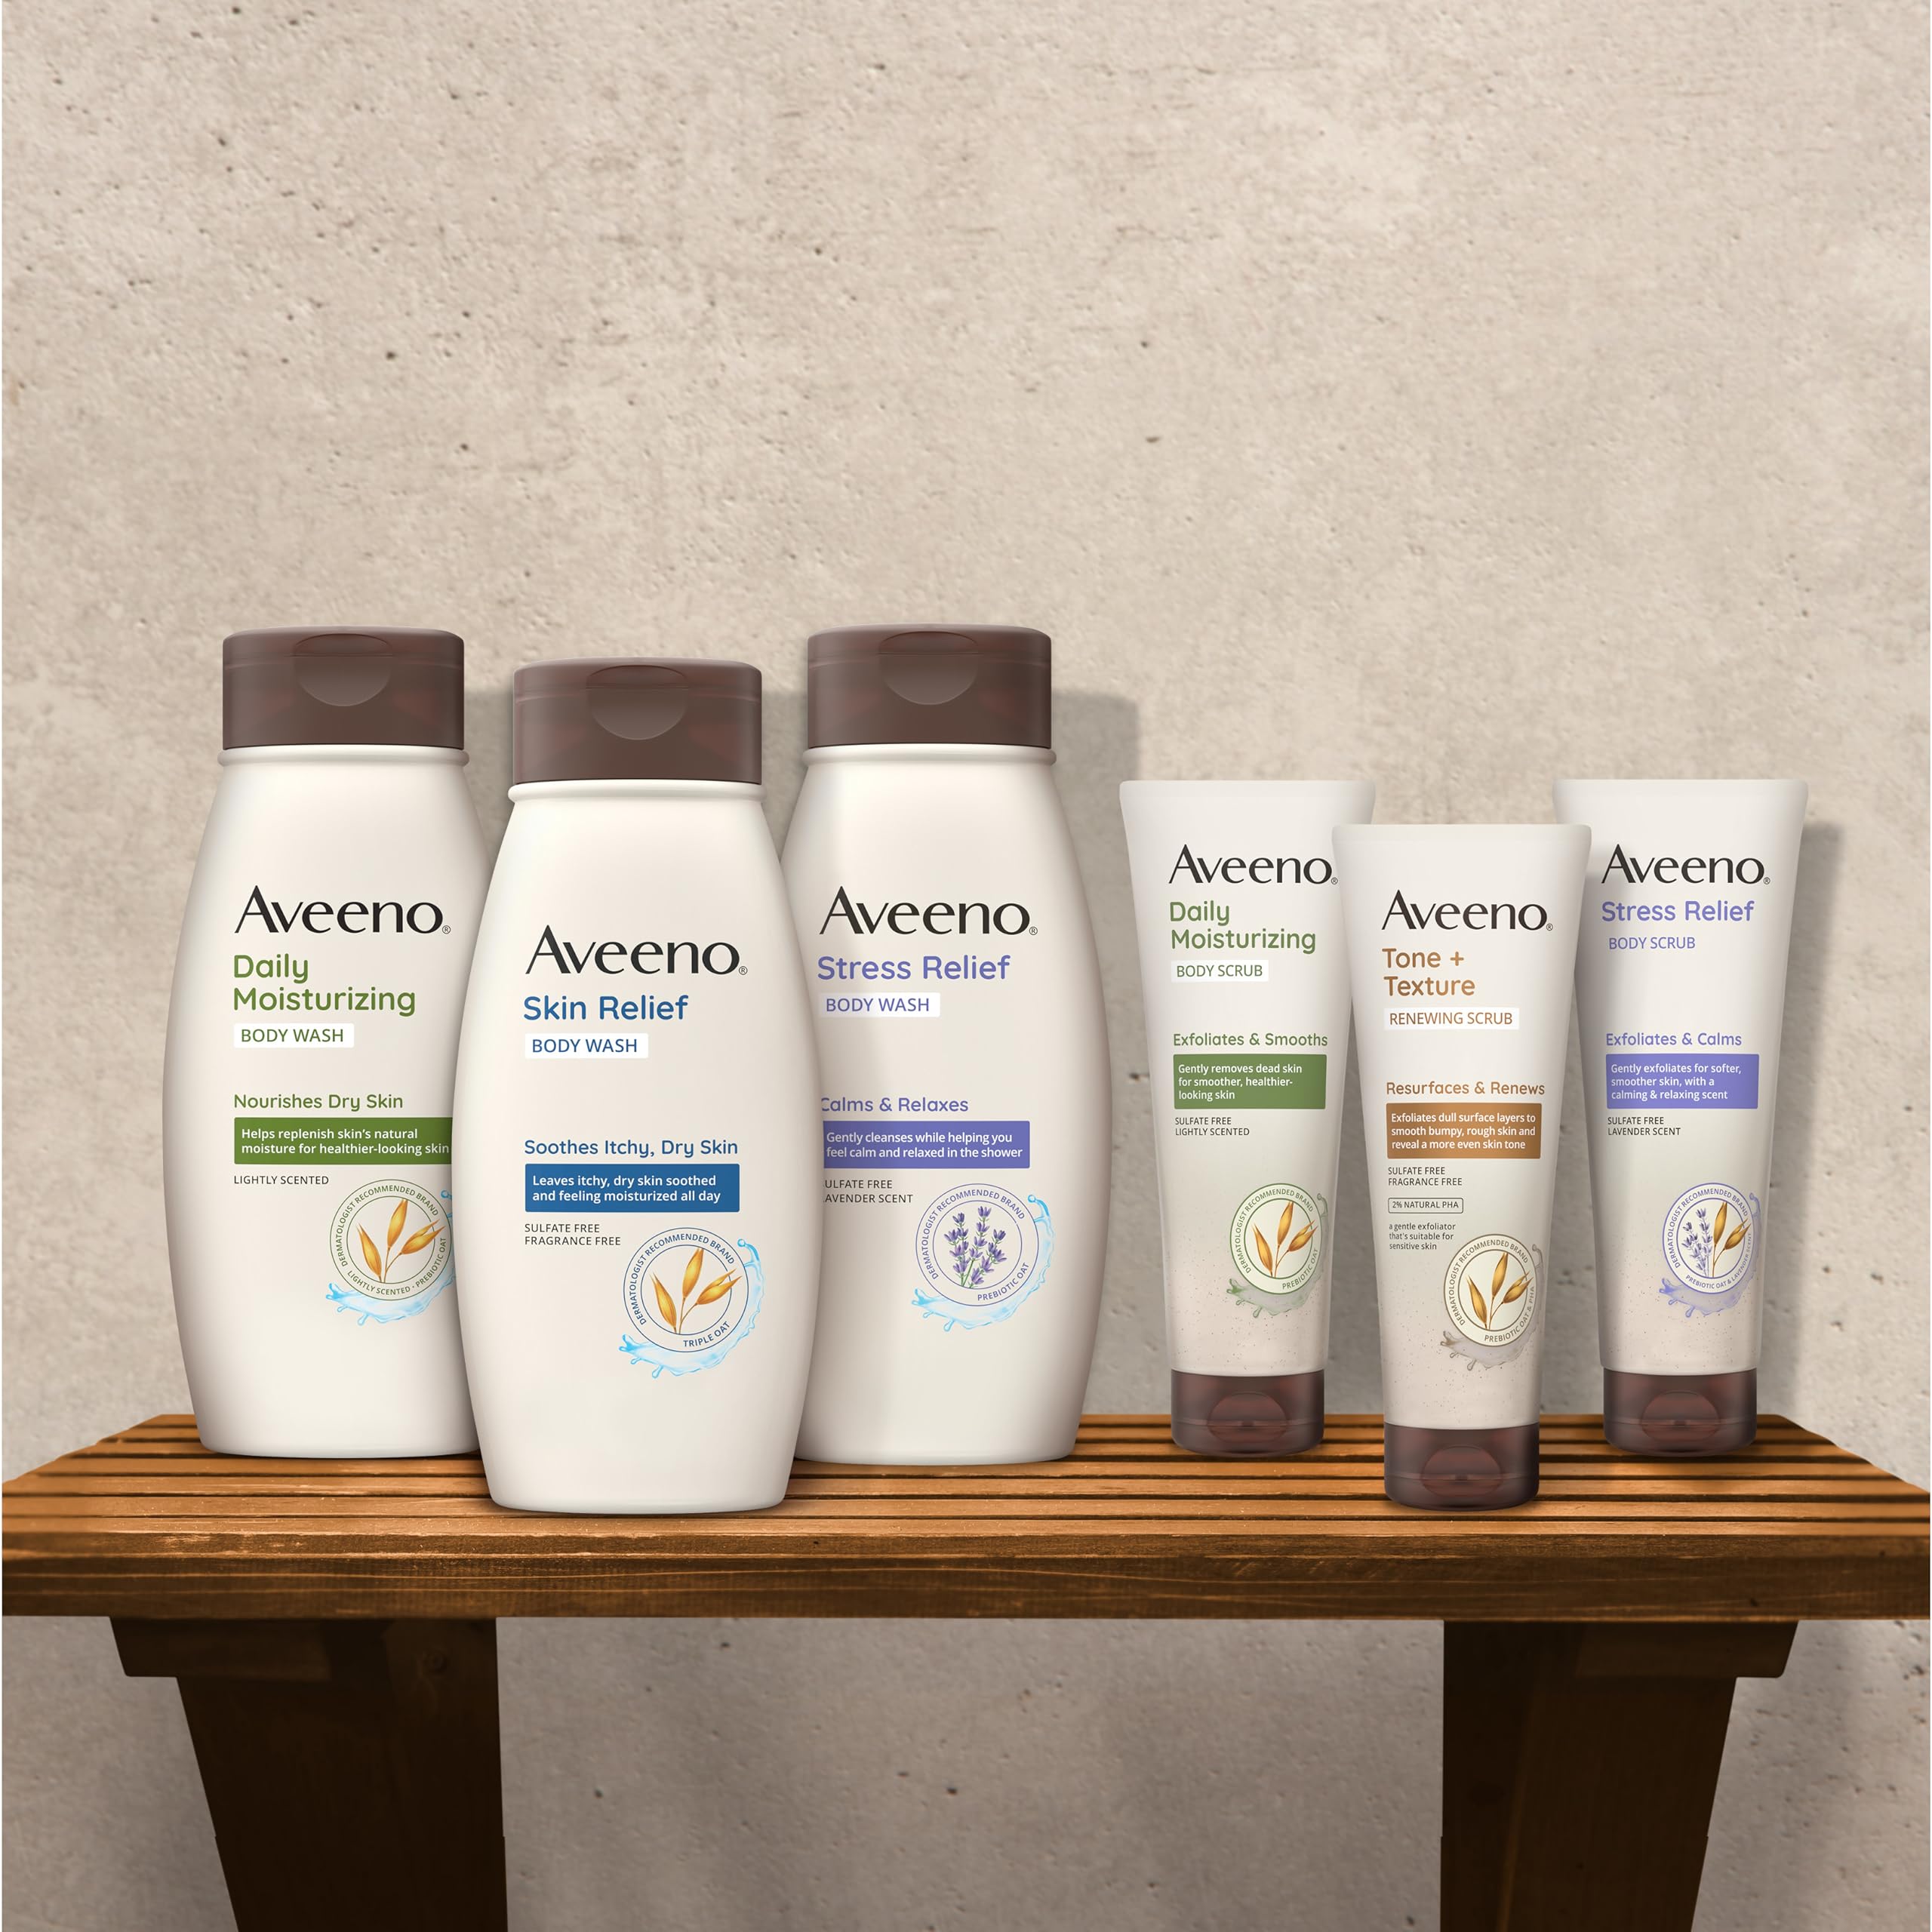 Aveeno Stress Relief Body Wash with Soothing Oat & Lavender Scent for Sensitive Skin, Moisturizing Shower Wash Gently Cleanses & Helps You Feel Calm, Sulfate-Free, Twin Pack, 2 x 18 fl. oz